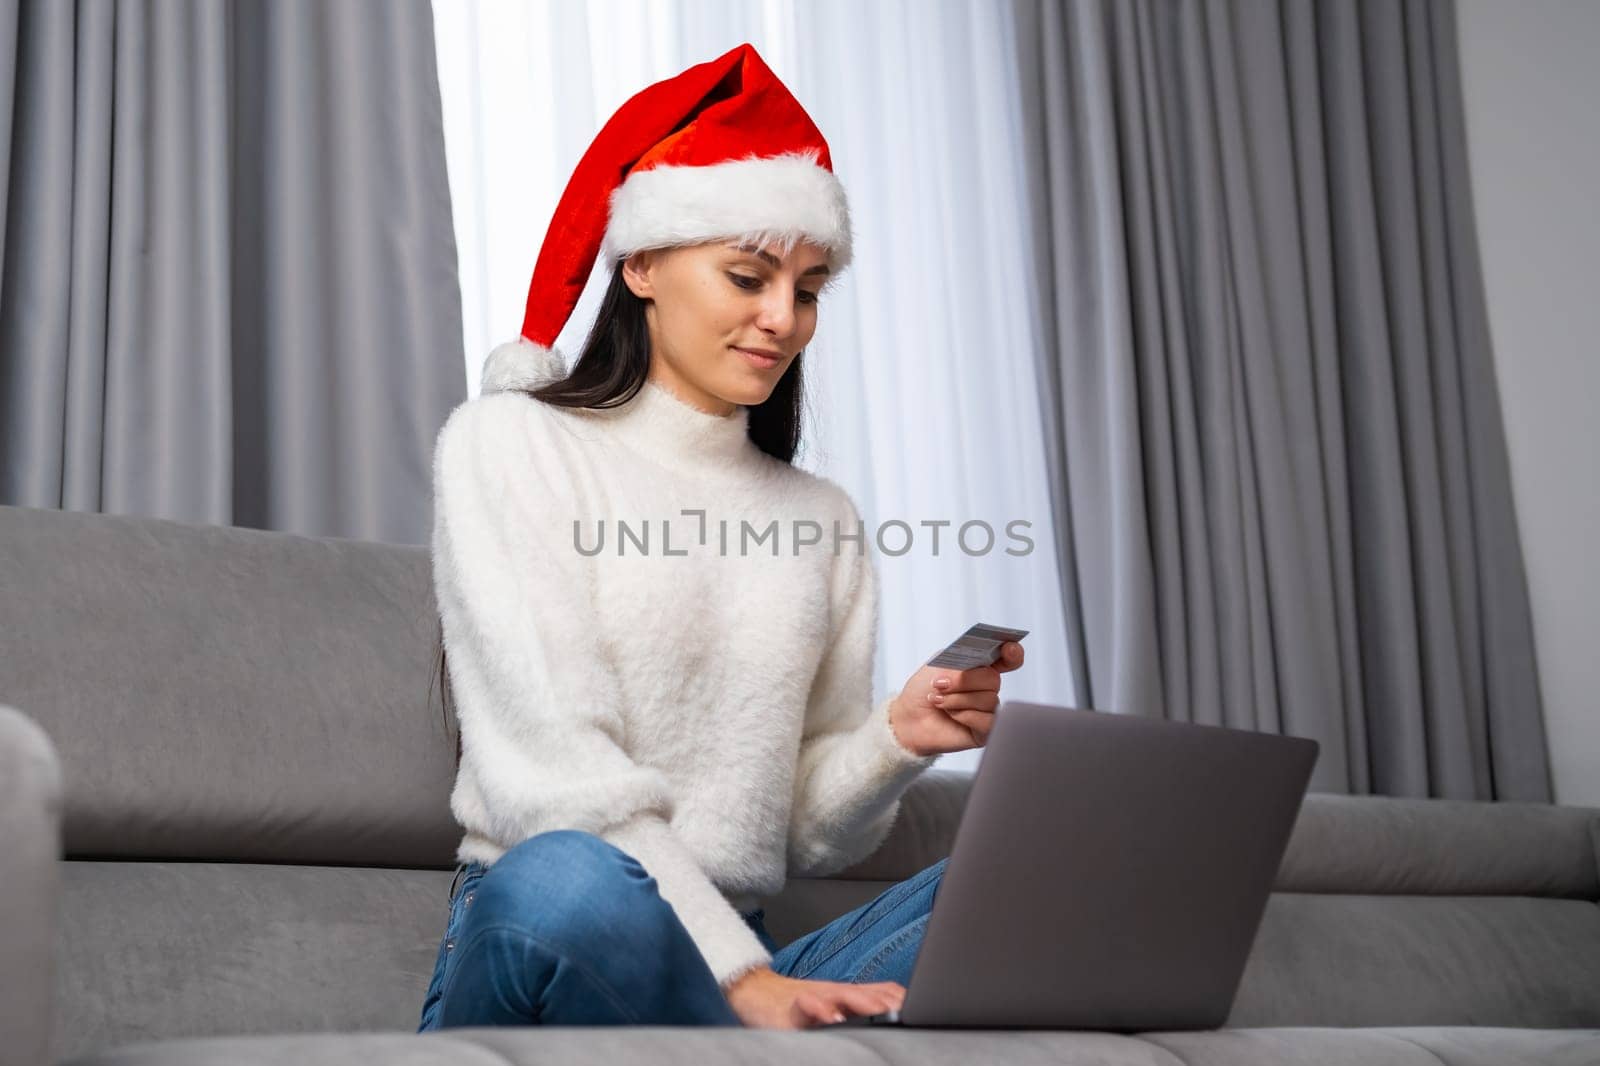 A beautiful young woman in a Santa Claus hat uses a credit card and makes payment using a laptop while sitting in the living room.